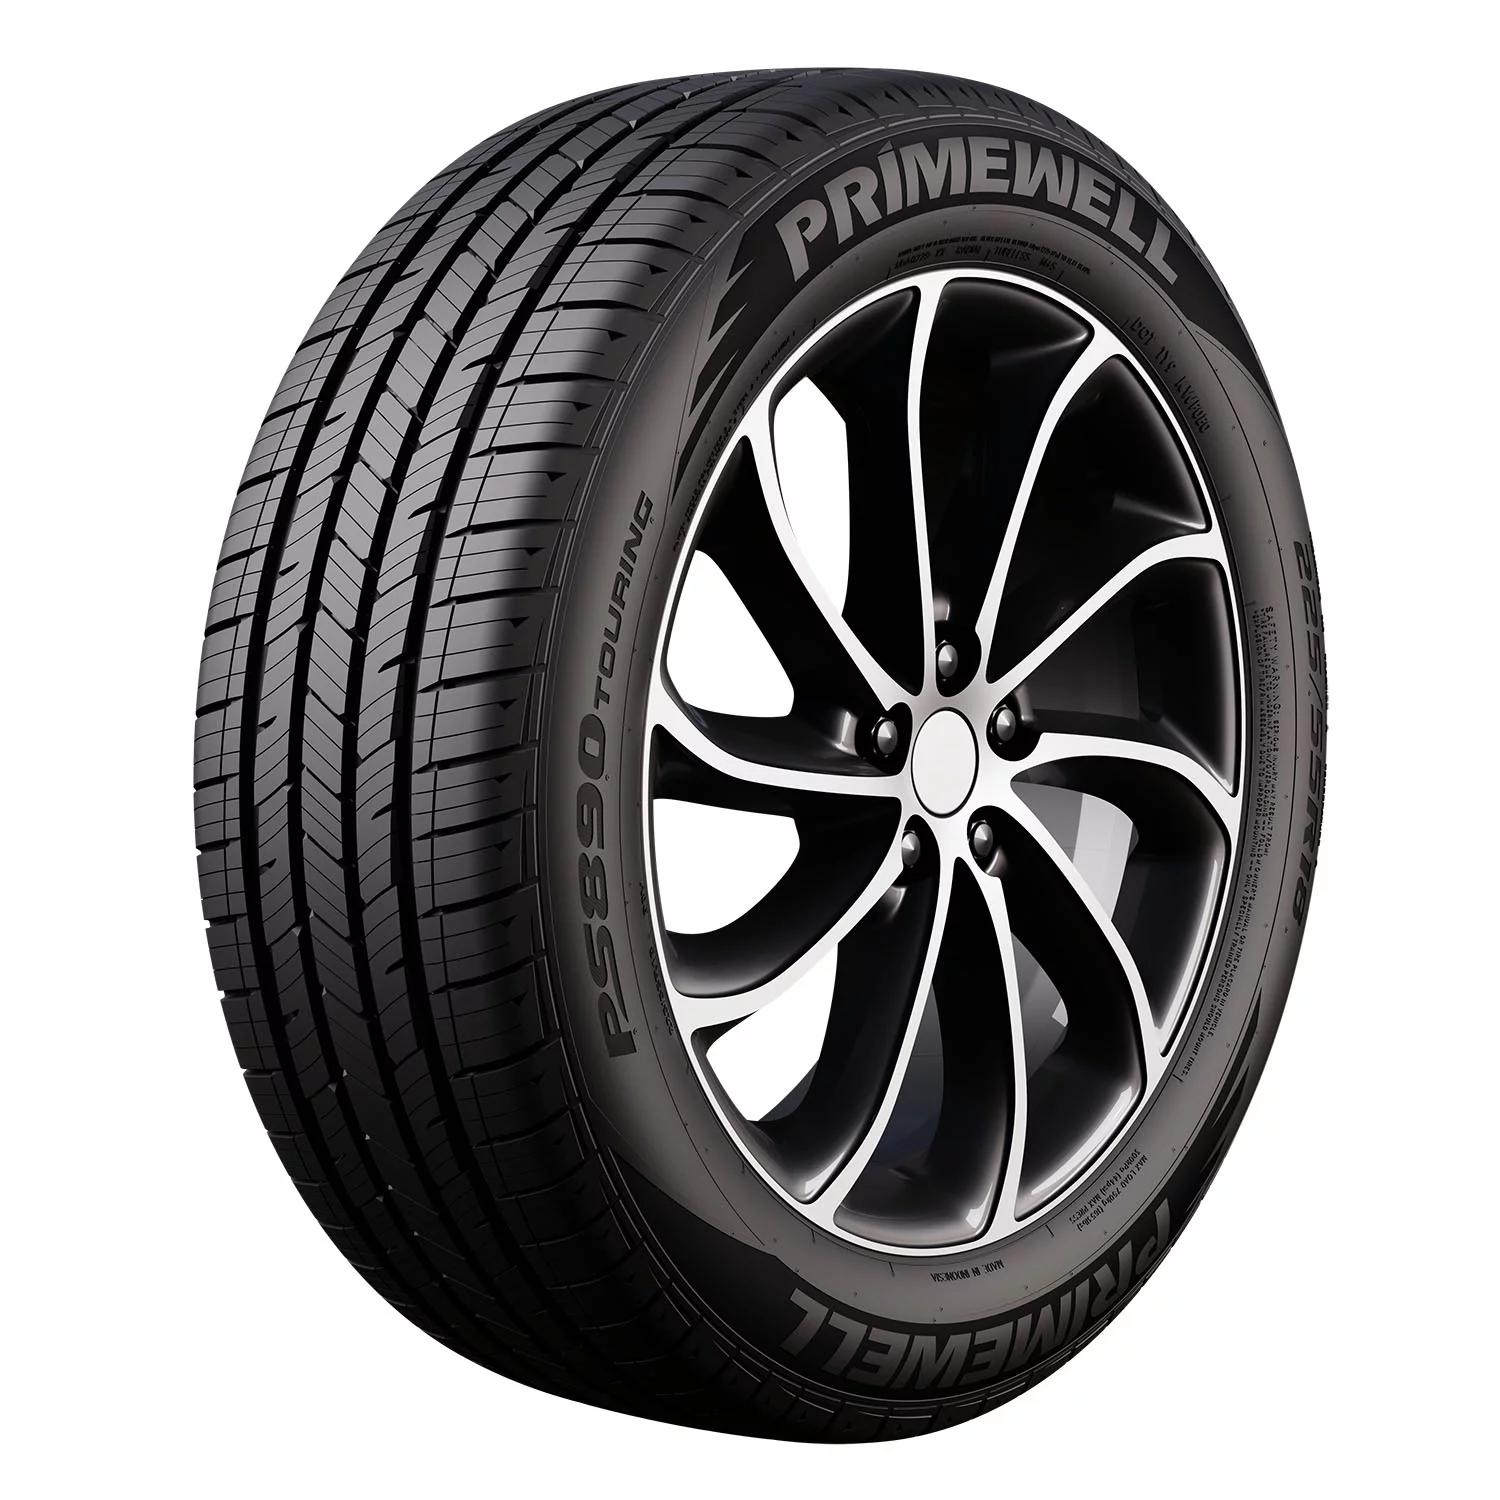 Primewell PS890 Touring All Season 195/60R15 88H Passenger Tire